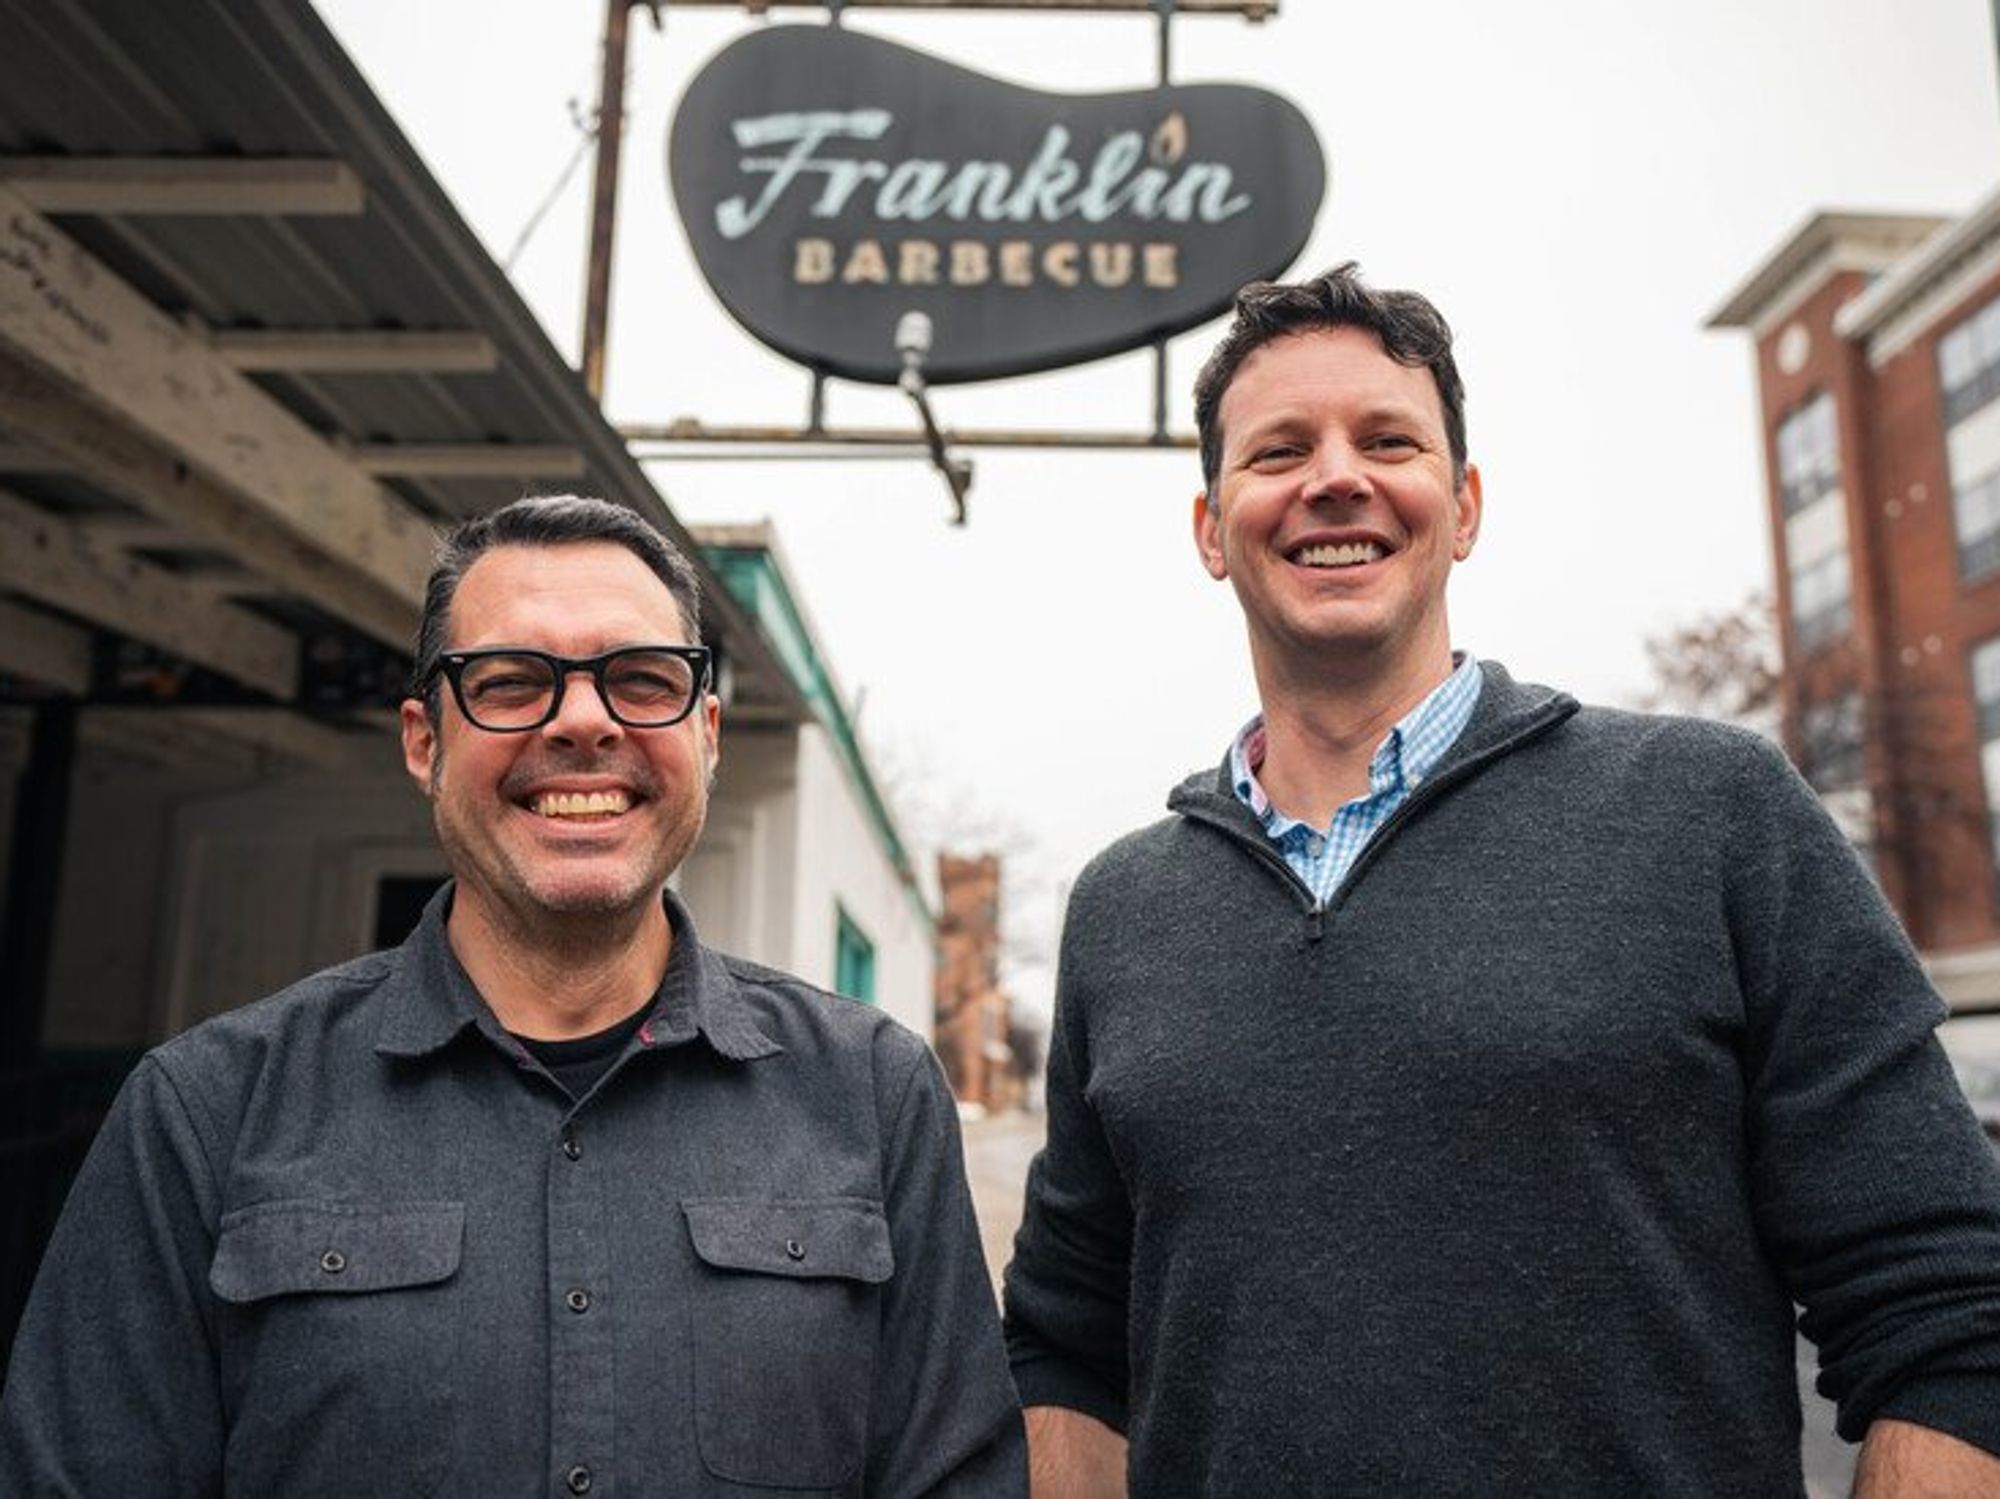 Aaron Franklin of Franklin Barbecue with Mark Brega of British Airways